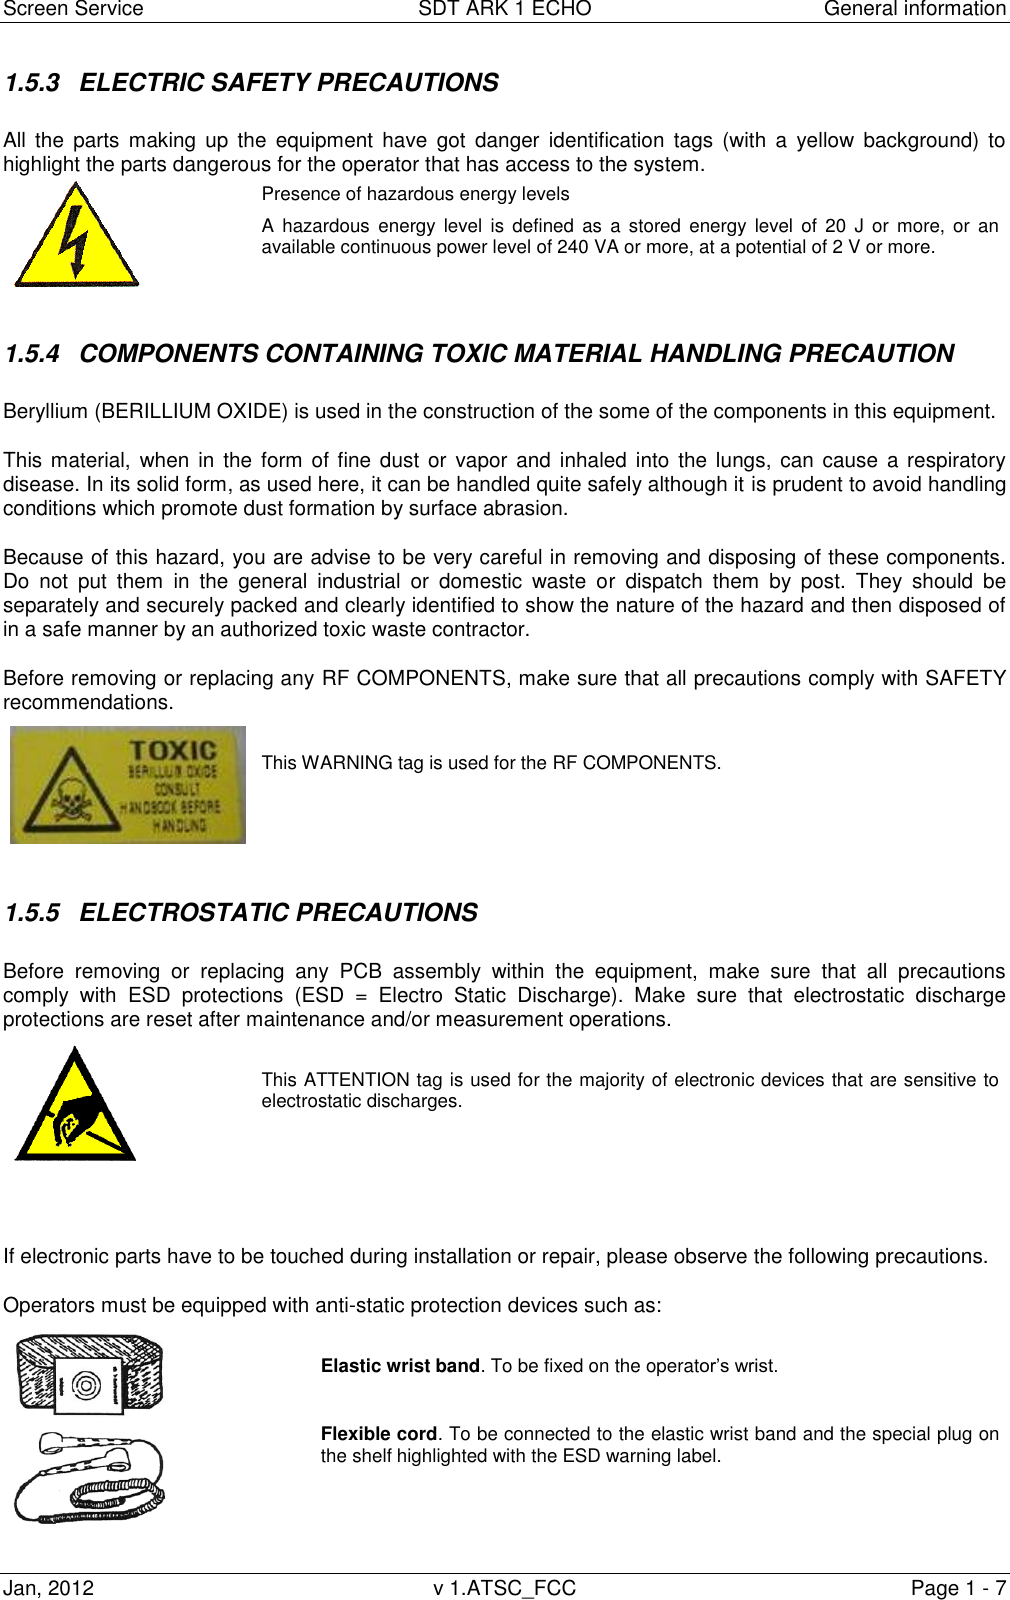 Screen Service  SDT ARK 1 ECHO  General information Jan, 2012  v 1.ATSC_FCC  Page 1 - 7 1.5.3  ELECTRIC SAFETY PRECAUTIONS All  the  parts  making  up  the  equipment  have  got  danger  identification  tags  (with  a  yellow  background)  to highlight the parts dangerous for the operator that has access to the system.  Presence of hazardous energy levels A  hazardous  energy level  is  defined  as  a  stored energy level of  20  J  or  more,  or  an available continuous power level of 240 VA or more, at a potential of 2 V or more.  1.5.4  COMPONENTS CONTAINING TOXIC MATERIAL HANDLING PRECAUTION  Beryllium (BERILLIUM OXIDE) is used in the construction of the some of the components in this equipment. This material,  when in the  form of fine dust  or  vapor and  inhaled into the  lungs, can cause  a  respiratory disease. In its solid form, as used here, it can be handled quite safely although it is prudent to avoid handling conditions which promote dust formation by surface abrasion. Because of this hazard, you are advise to be very careful in removing and disposing of these components. Do  not  put  them  in  the  general  industrial  or  domestic  waste  or  dispatch  them  by  post.  They  should  be separately and securely packed and clearly identified to show the nature of the hazard and then disposed of in a safe manner by an authorized toxic waste contractor. Before removing or replacing any RF COMPONENTS, make sure that all precautions comply with SAFETY recommendations.    This WARNING tag is used for the RF COMPONENTS.  1.5.5  ELECTROSTATIC PRECAUTIONS Before  removing  or  replacing  any  PCB  assembly  within  the  equipment,  make  sure  that  all  precautions comply  with  ESD  protections  (ESD  =  Electro  Static  Discharge).  Make  sure  that  electrostatic  discharge protections are reset after maintenance and/or measurement operations.   This ATTENTION tag is used for the majority of electronic devices that are sensitive to electrostatic discharges.   If electronic parts have to be touched during installation or repair, please observe the following precautions. Operators must be equipped with anti-static protection devices such as:   Elastic wrist band. To be fixed on the operat  Flexible cord. To be connected to the elastic wrist band and the special plug on the shelf highlighted with the ESD warning label.  